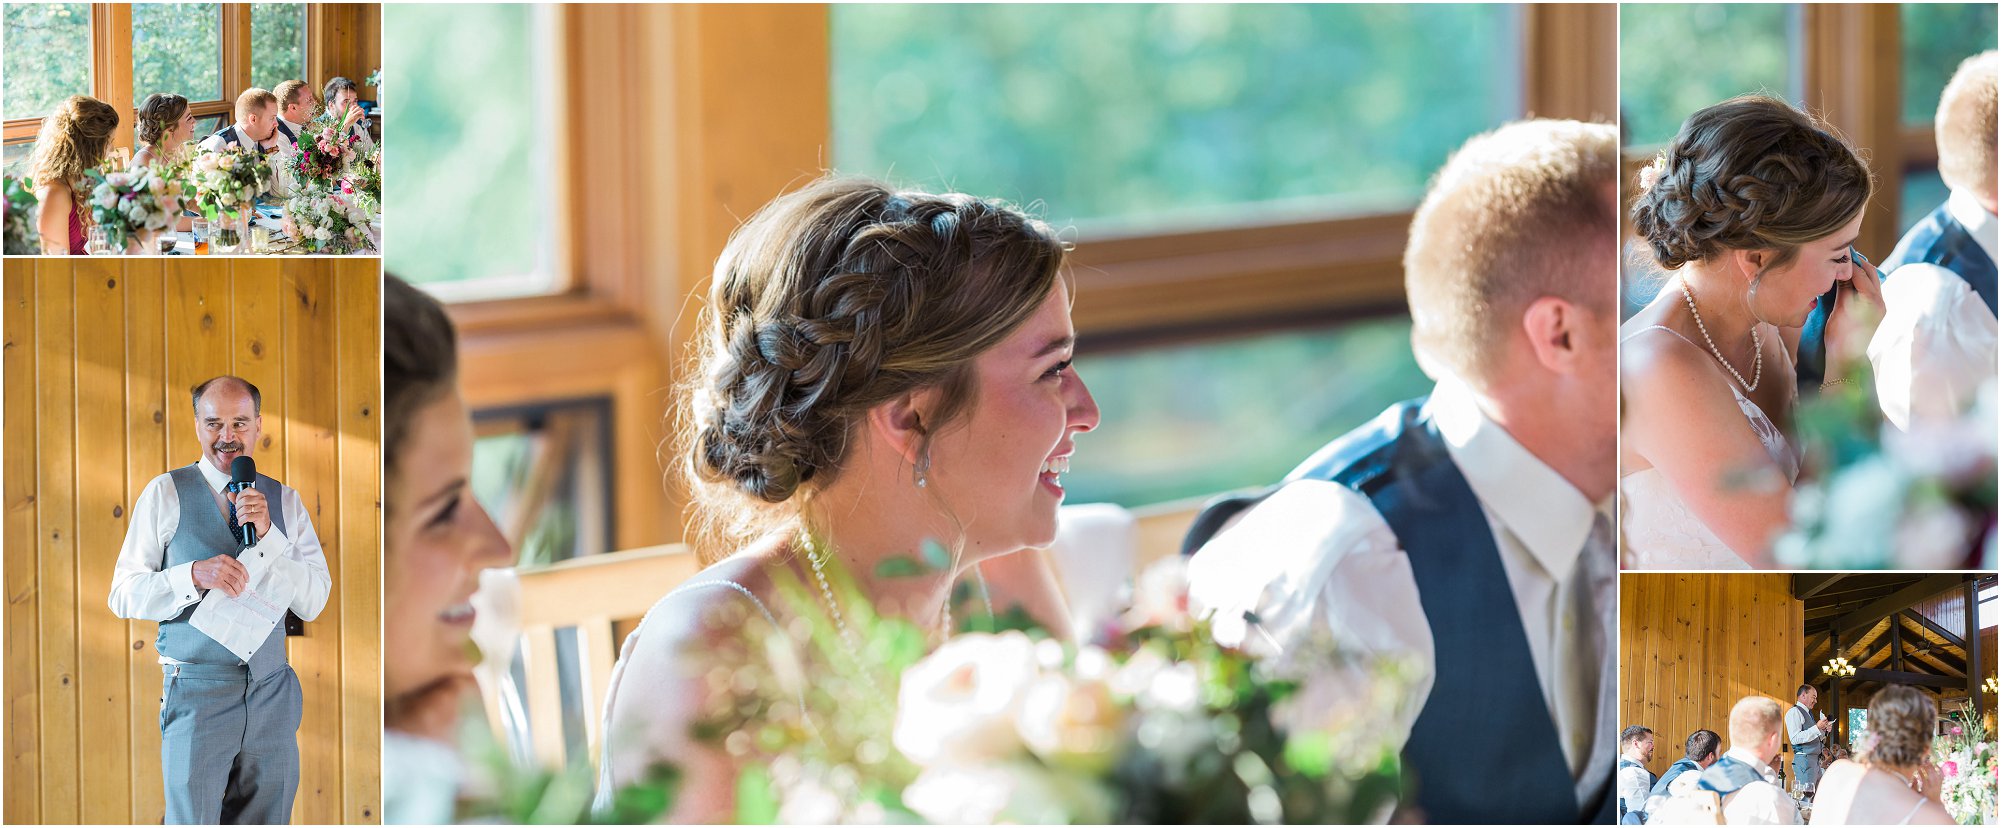 The father of the bride gives a wonderful toast in front of the big windows inside the Rock Springs Ranch wedding venue in Bend, OR. | Erica Swantek Photography